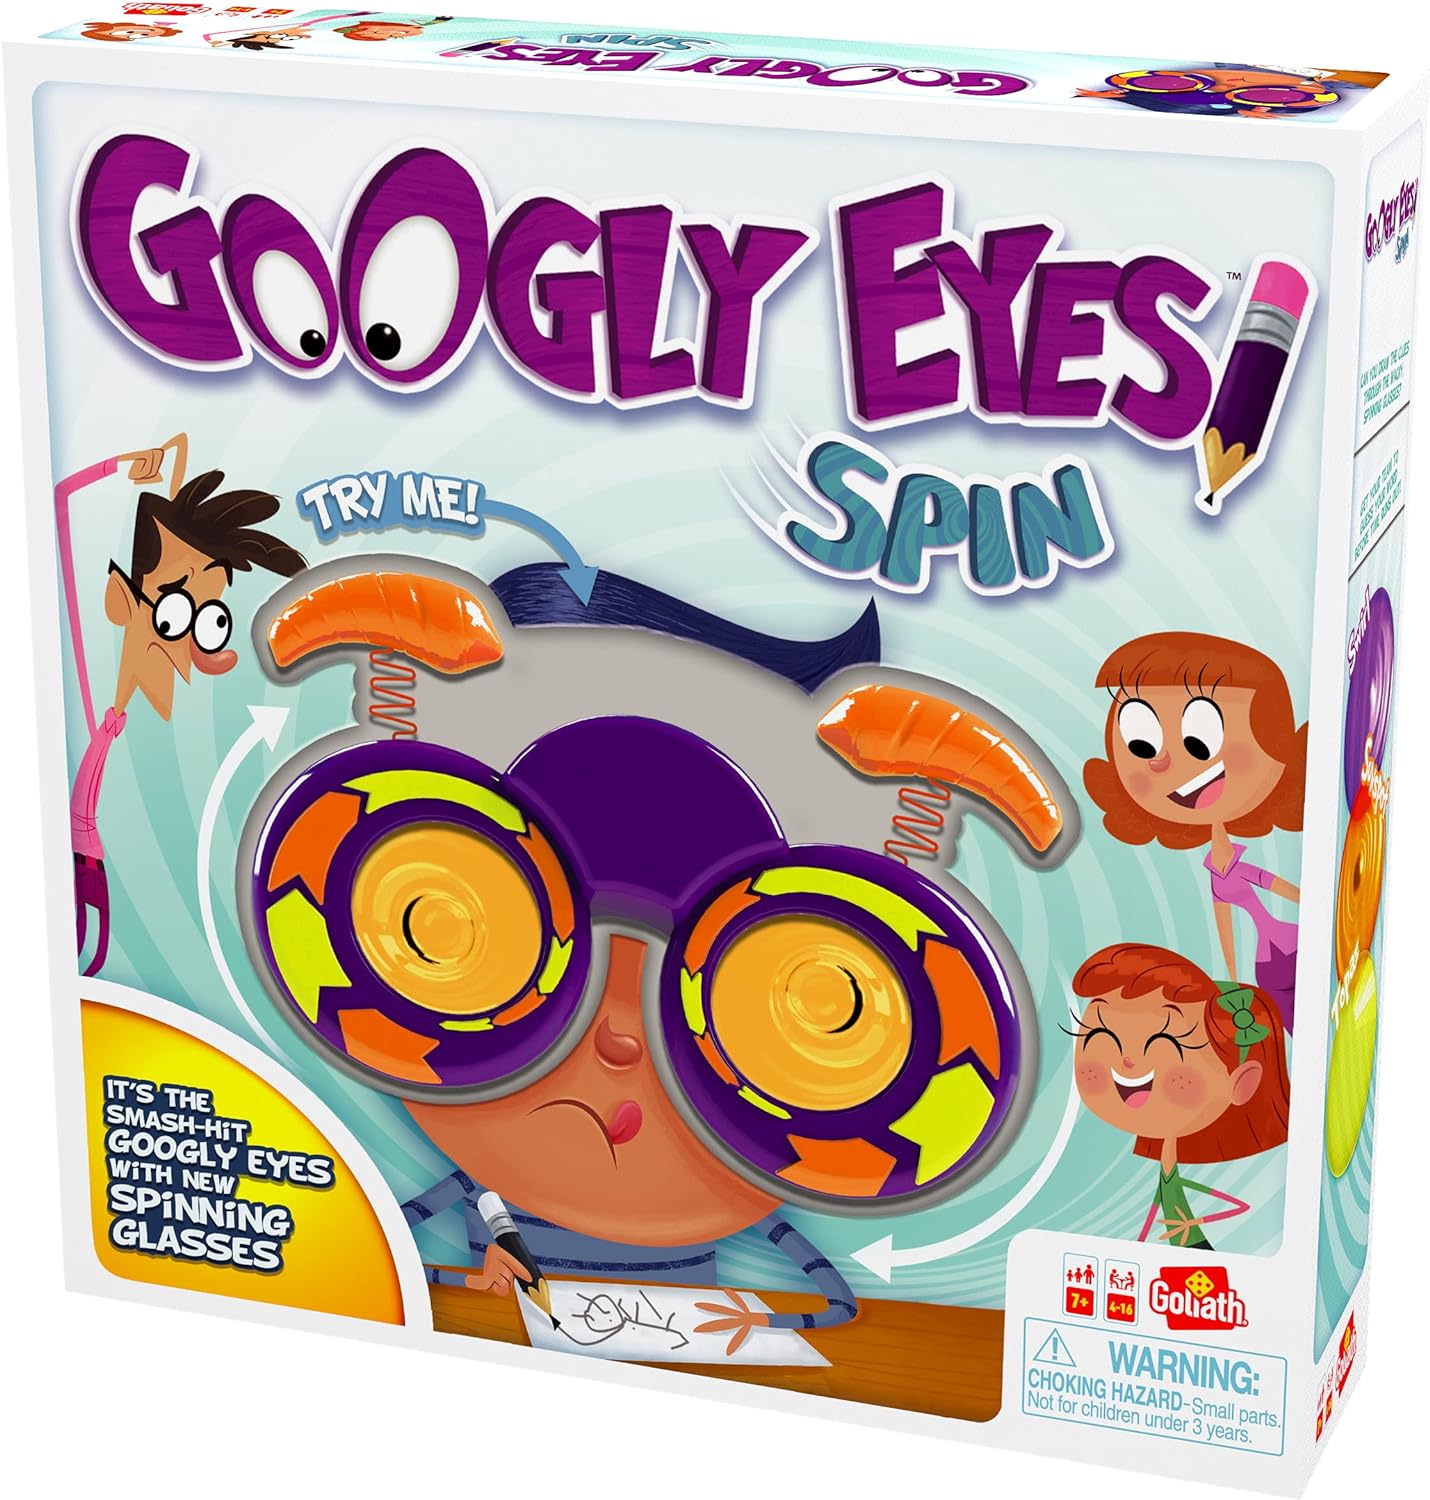 Googly Eyes Spin - The Classic Googly Eyes Family Drawing Game with Crazy, Vision-Altering Spinning Glasses by Goliath, Multi Color